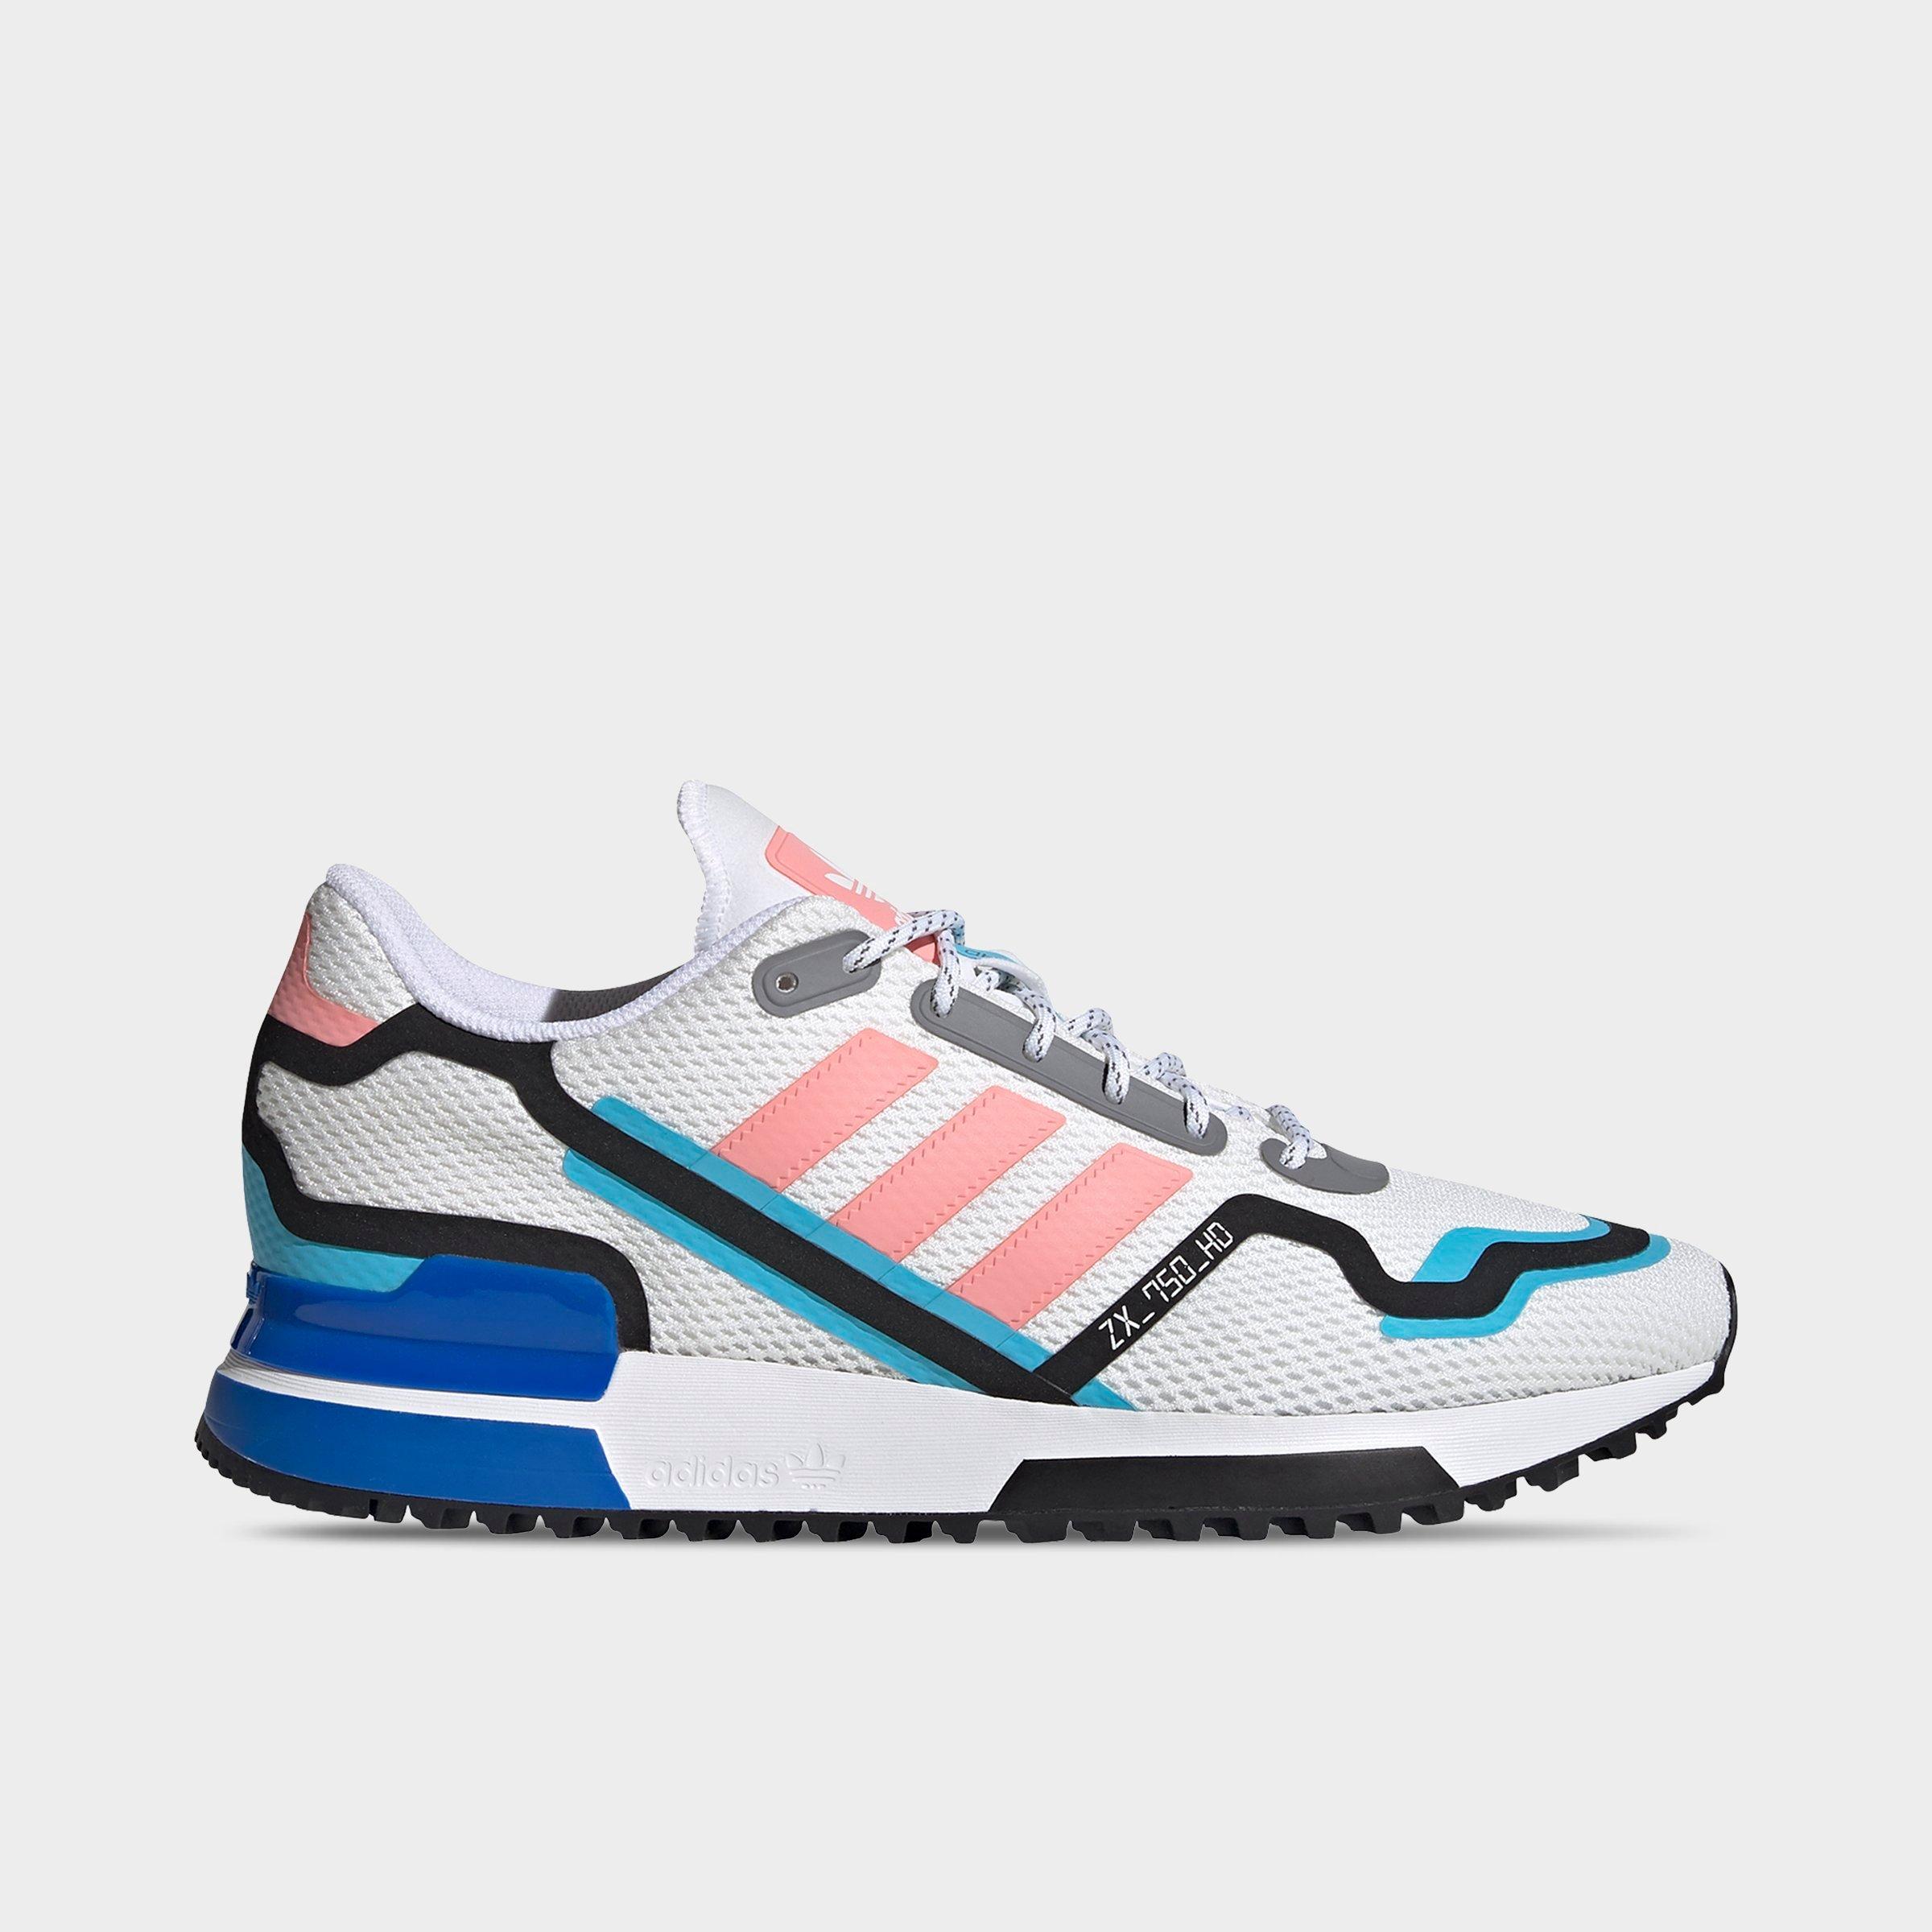 adidas zx 750 homme 2014